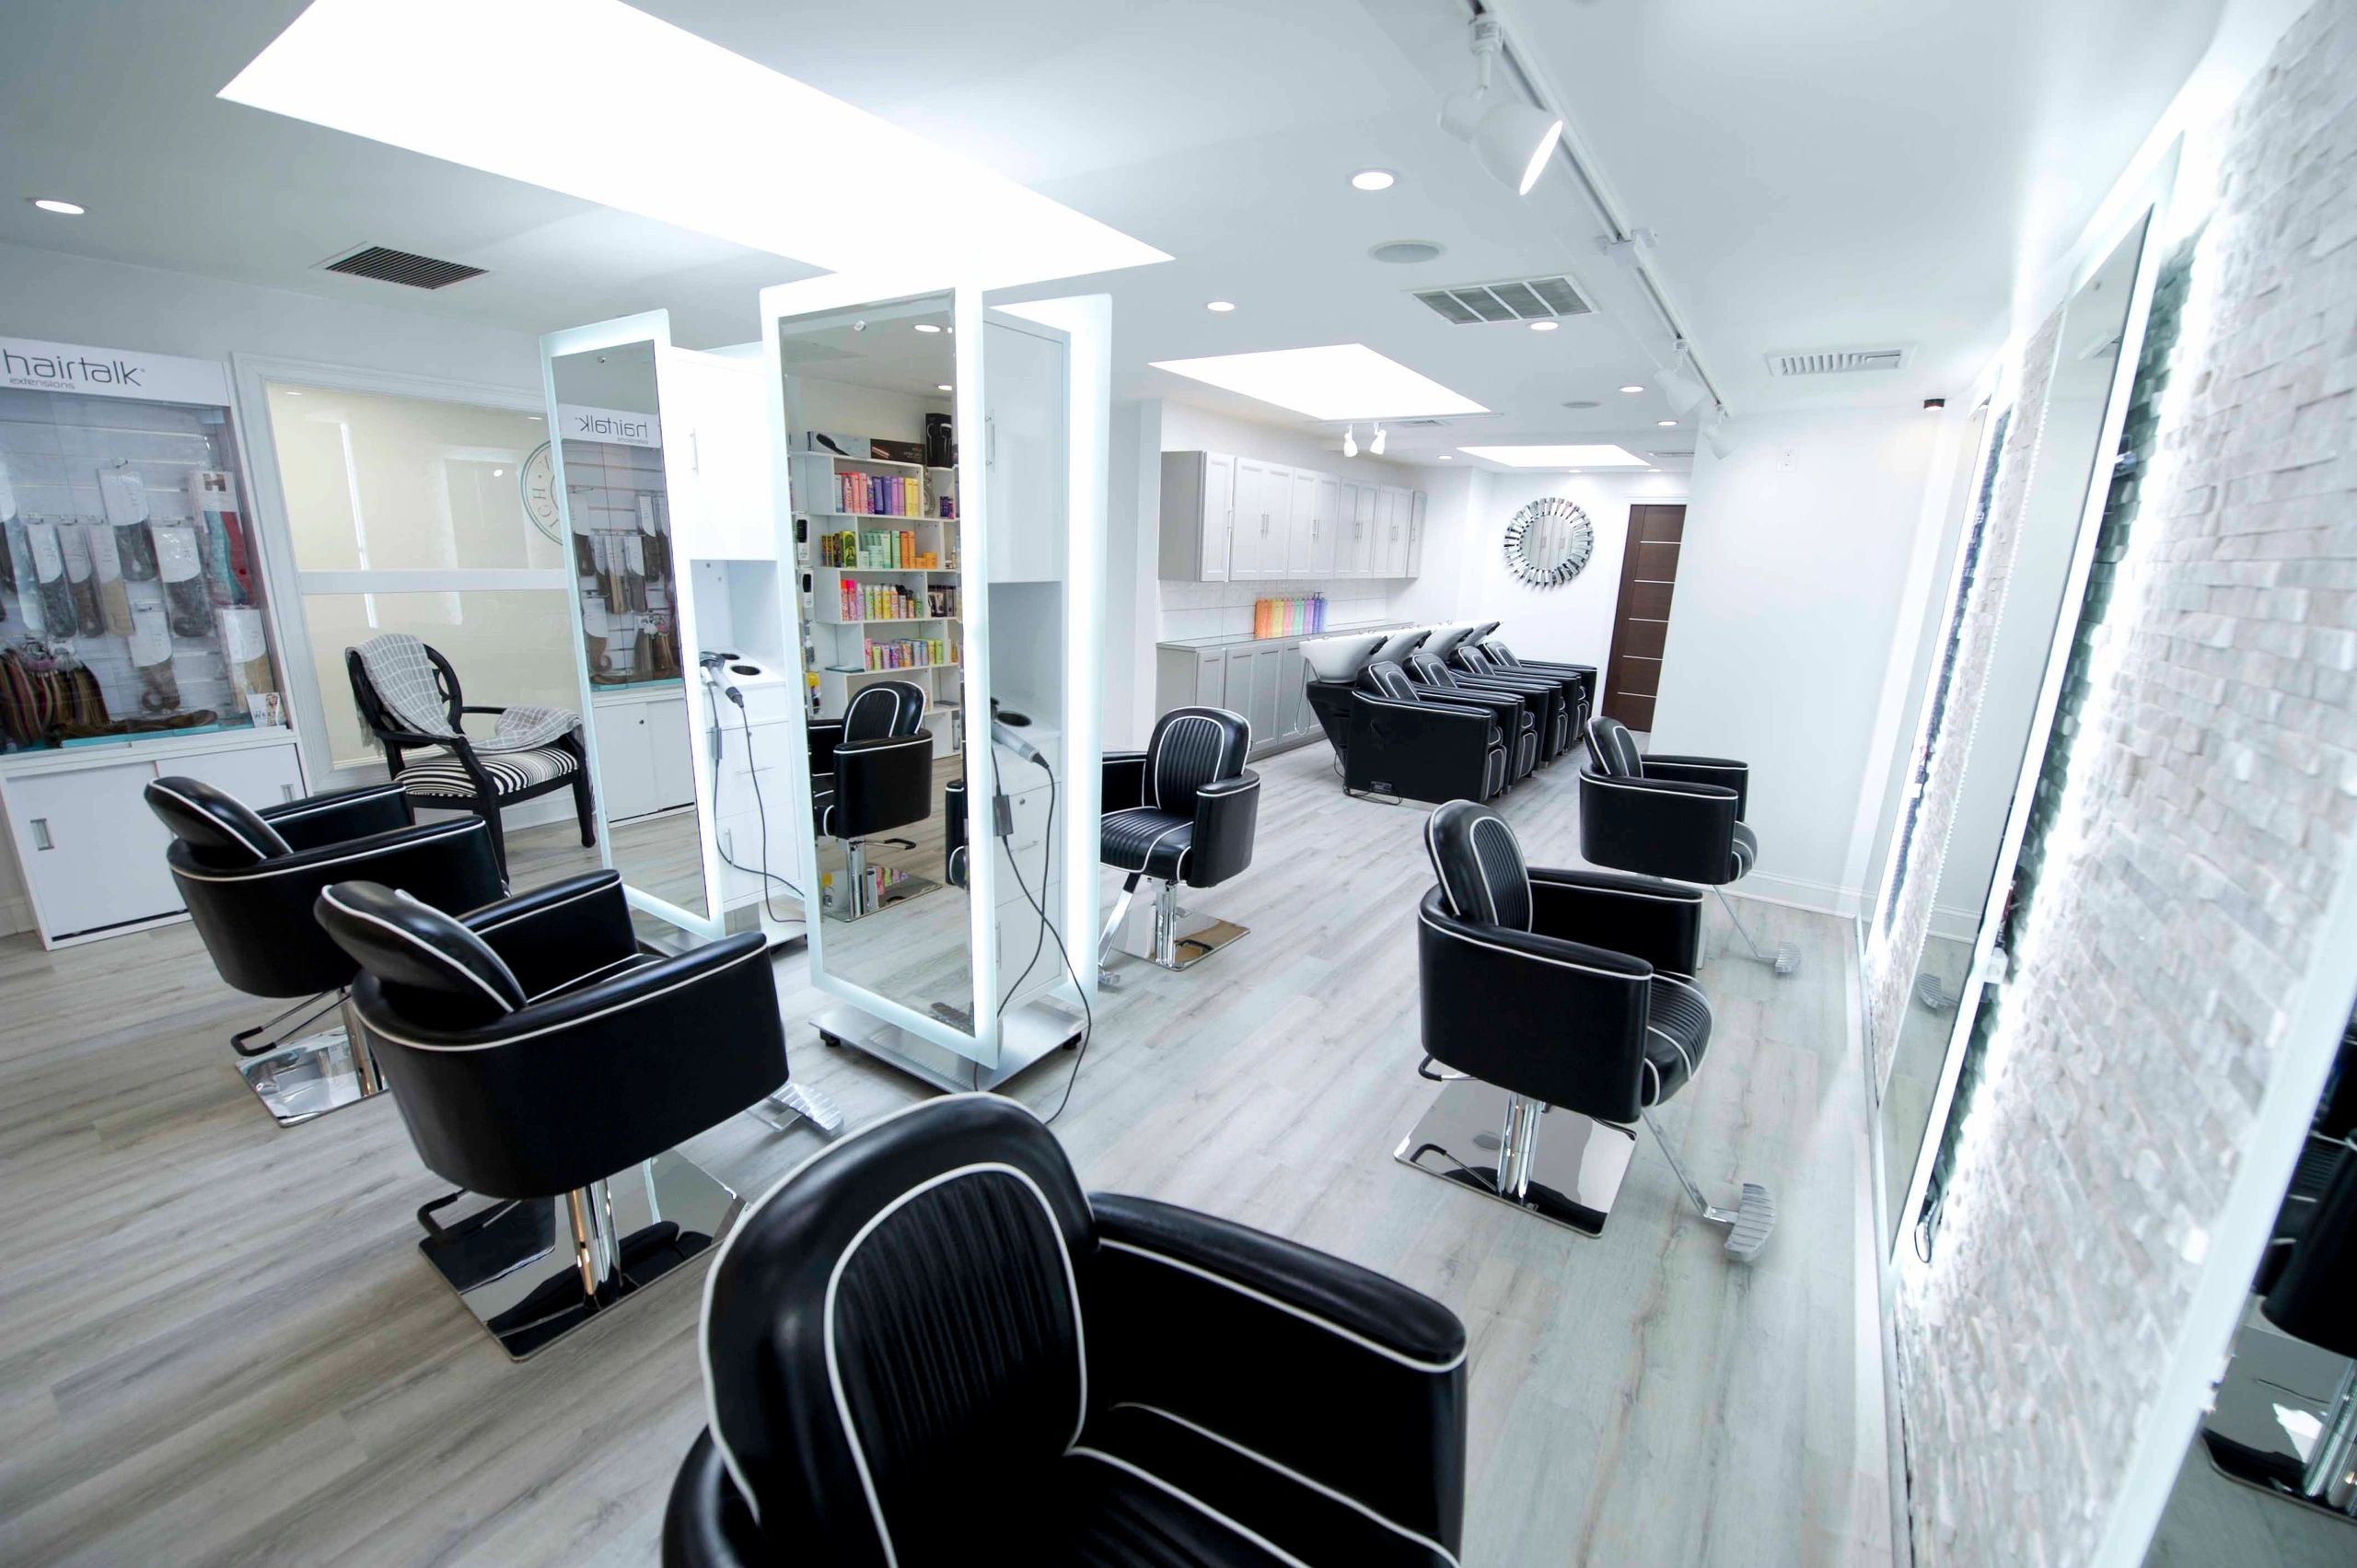 151 Greenwich Ave, Greenwich, CT 06830 - NEW UPDATED SALON SPACE